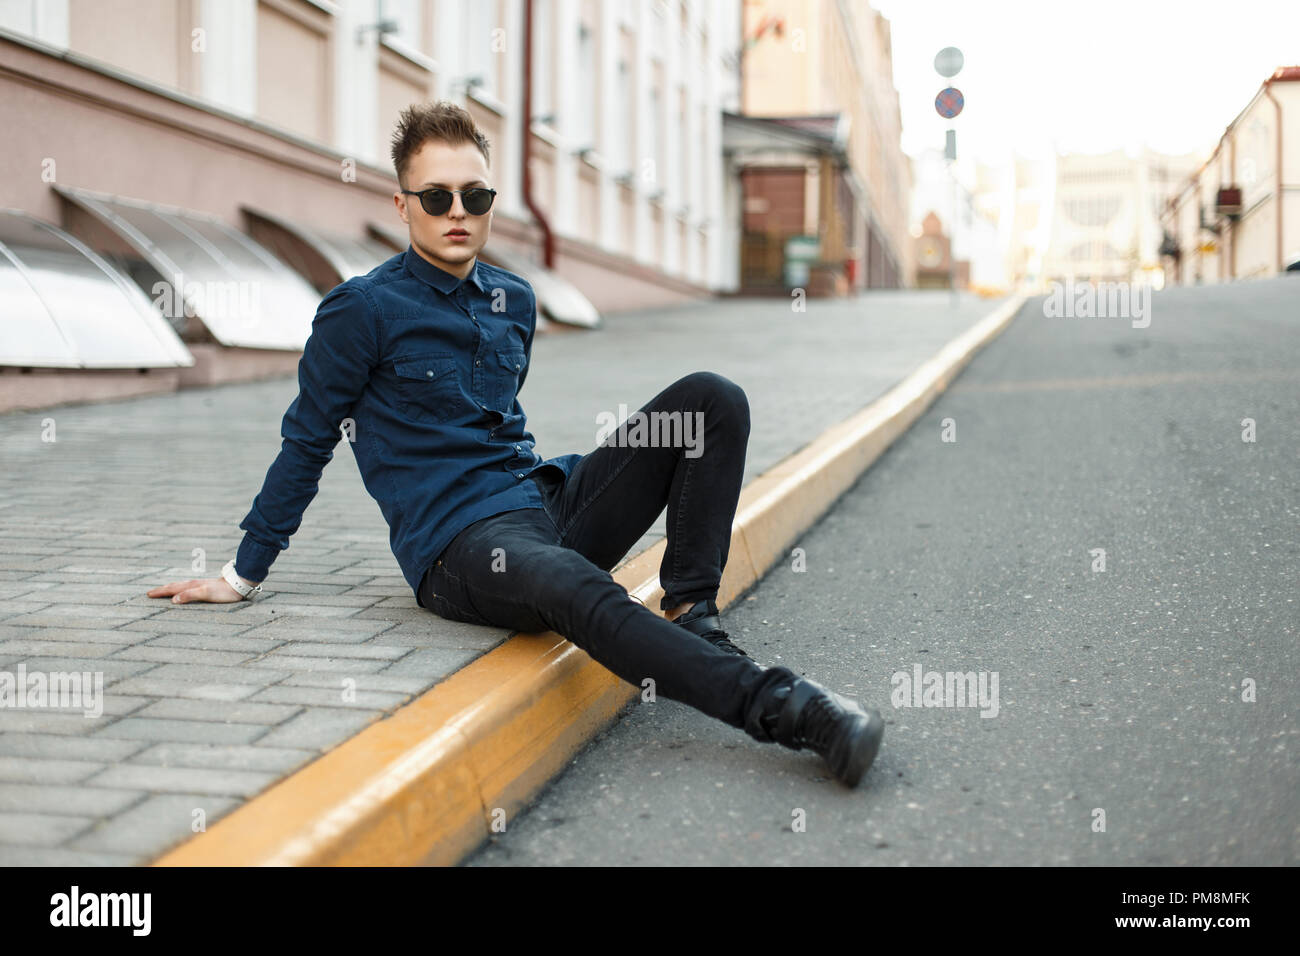 Handsome young man in a blue shirt, black jeans and sneakers sits on the sidewalk Stock Photo